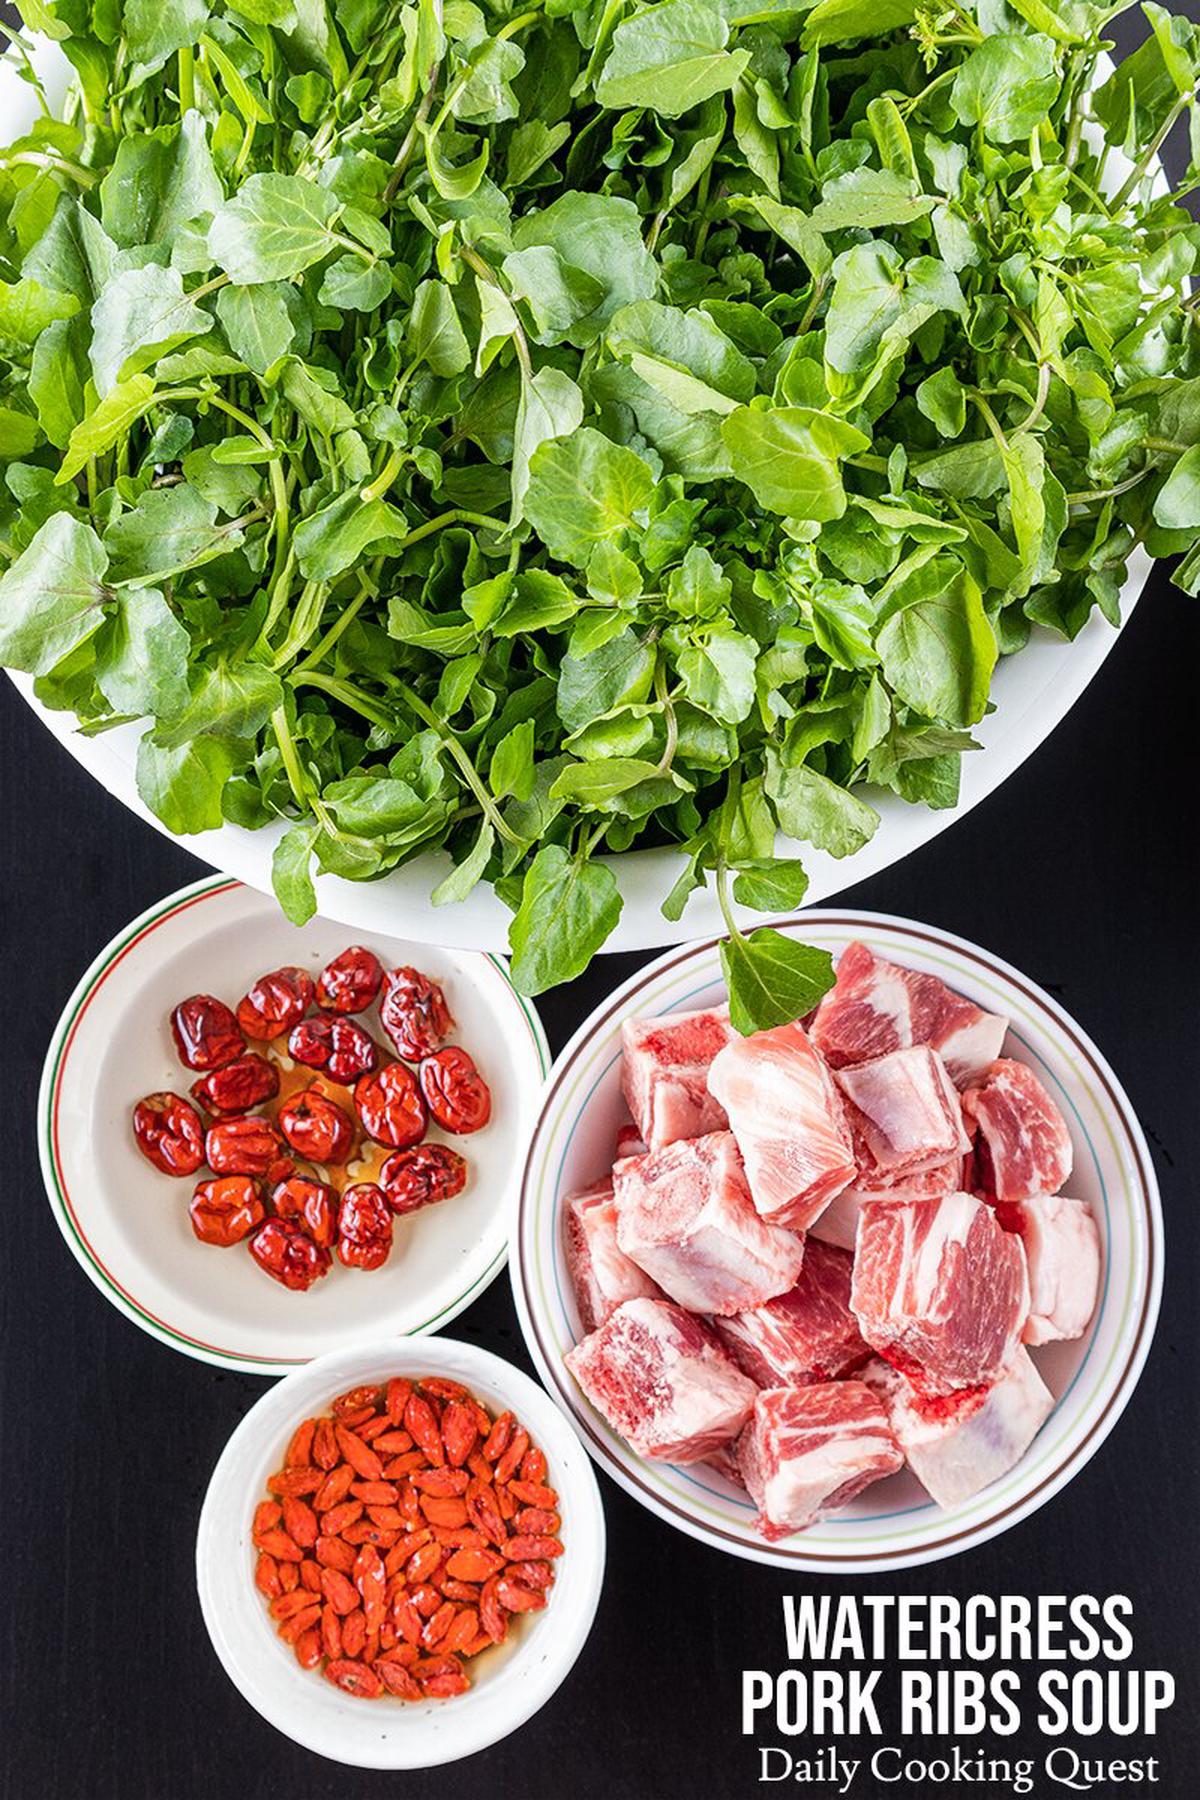 Ingredients to prepare Chinese watercress pork ribs soup: watercress, spare ribs, Chinese red dates/jujube, and goji berries.